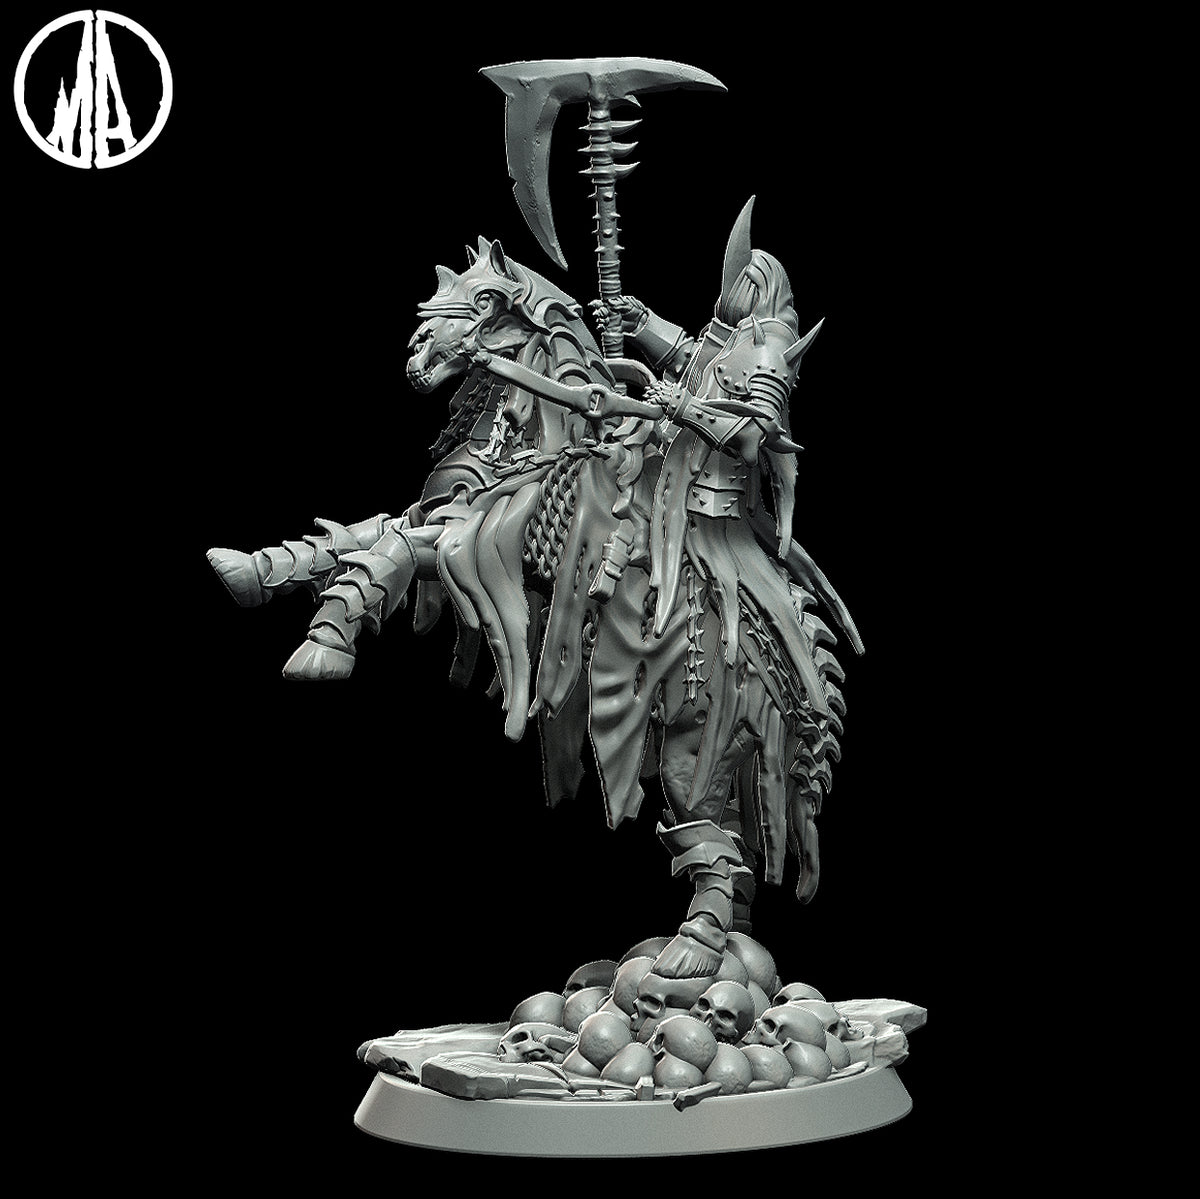 Shadow Rider | 32mm Scale Resin Model | From the Lost Souls Collection